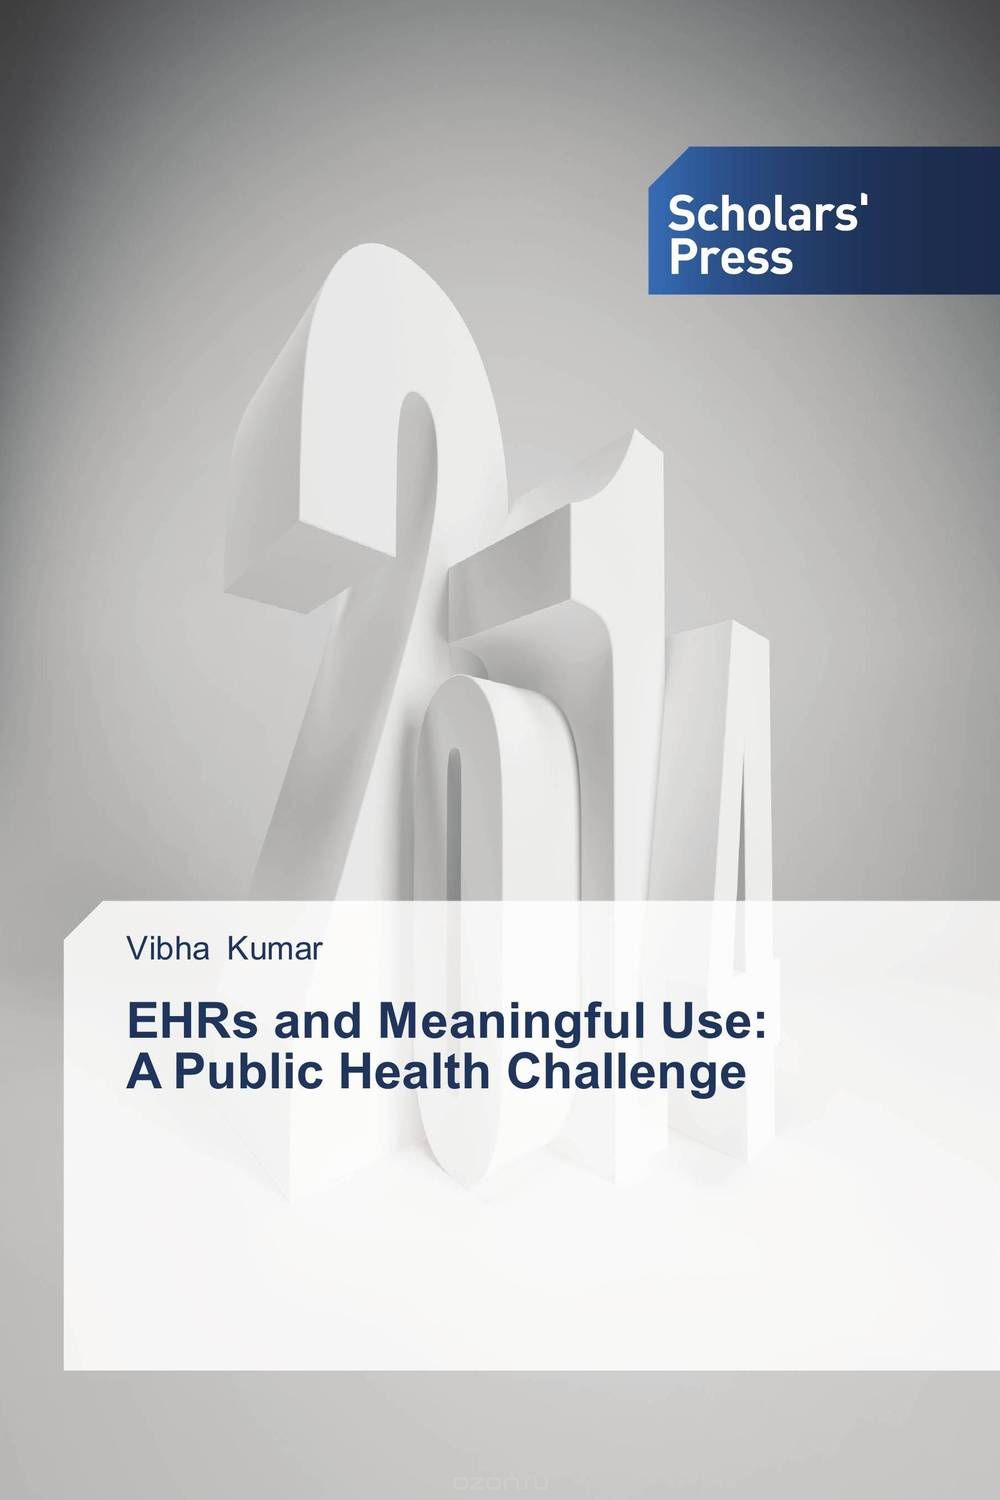 Скачать книгу "EHRs and Meaningful Use: A Public Health Challenge"